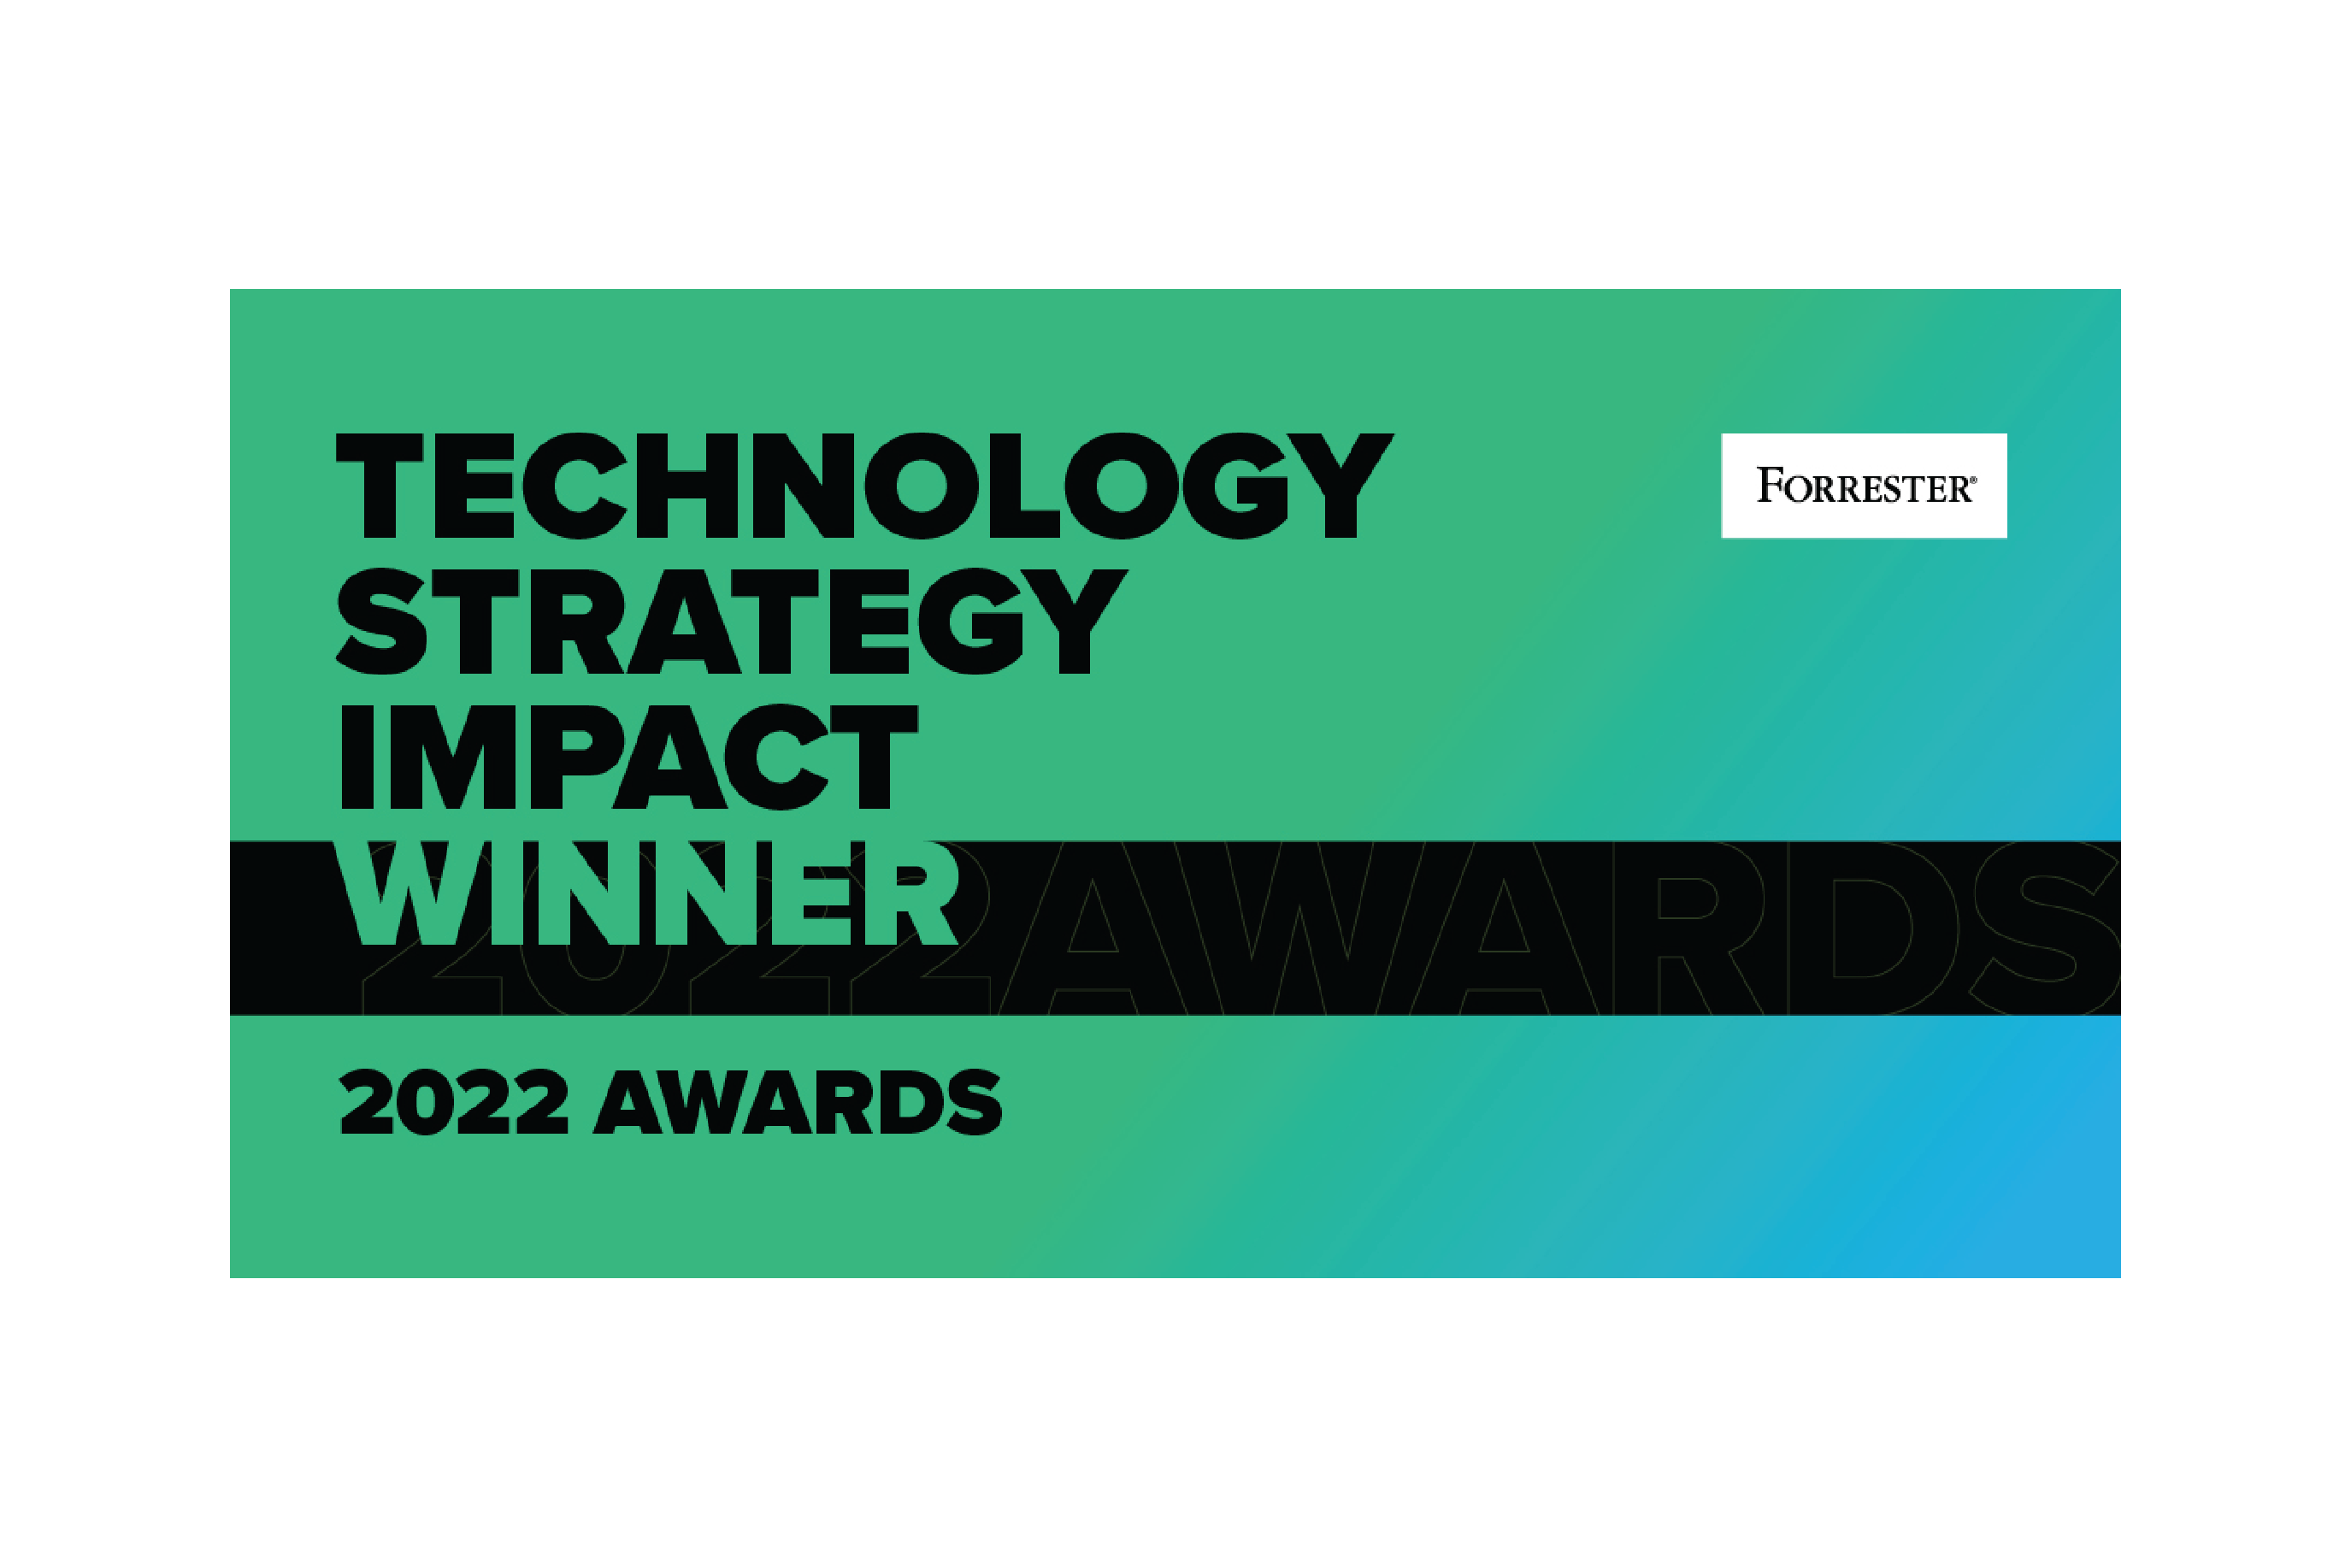 Forrester's 2022 Technology Strategy Impact Winner green and black logo on a white background